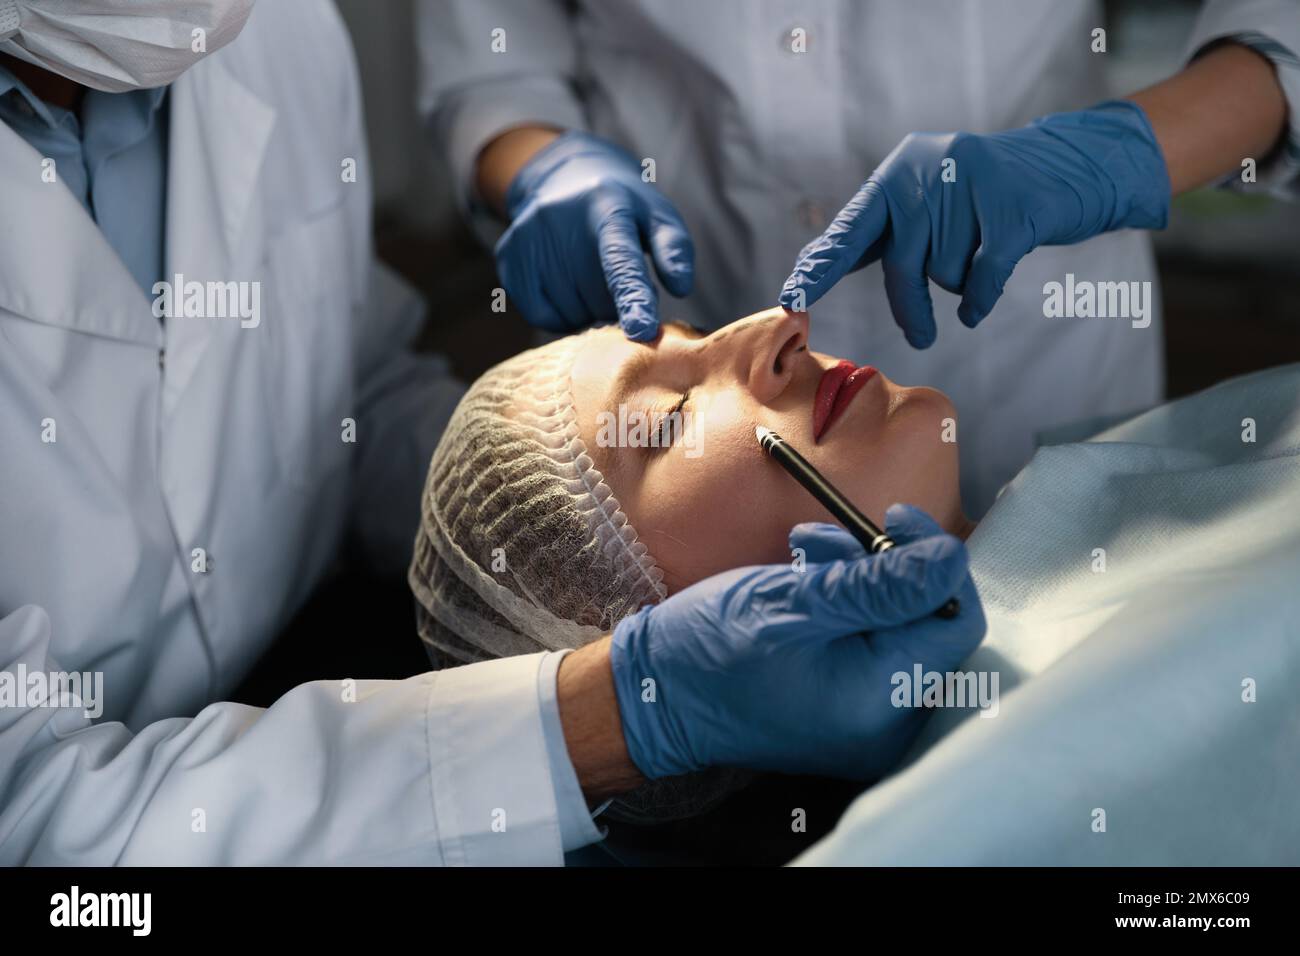 Doctor and nurse preparing female patient for cosmetic surgery in clinic Stock Photo